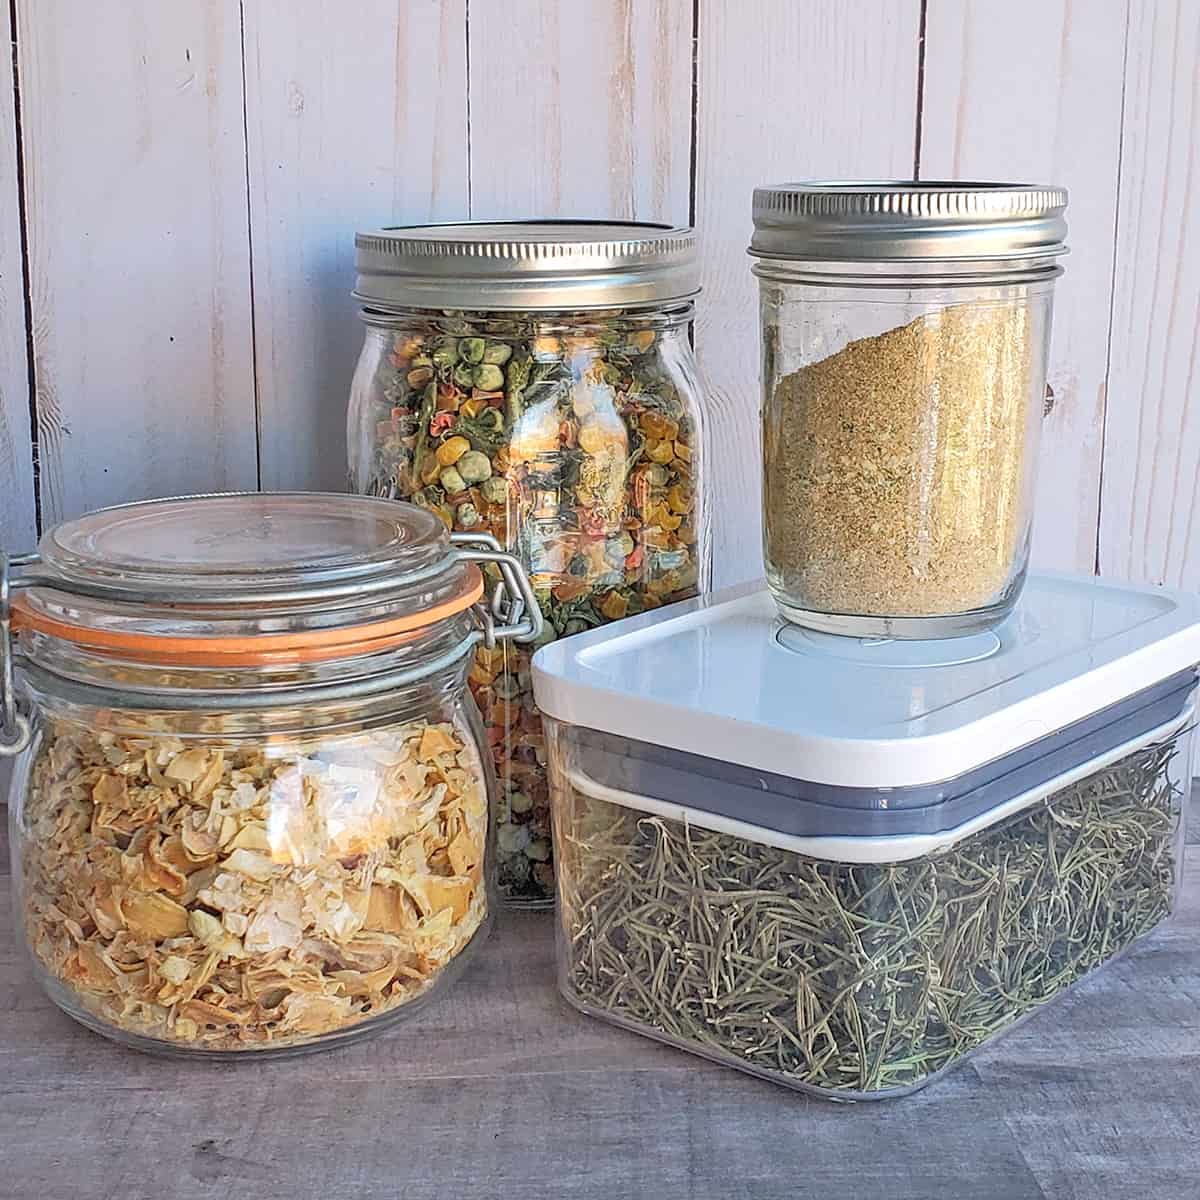 4 different storage containers for dehydrated goods